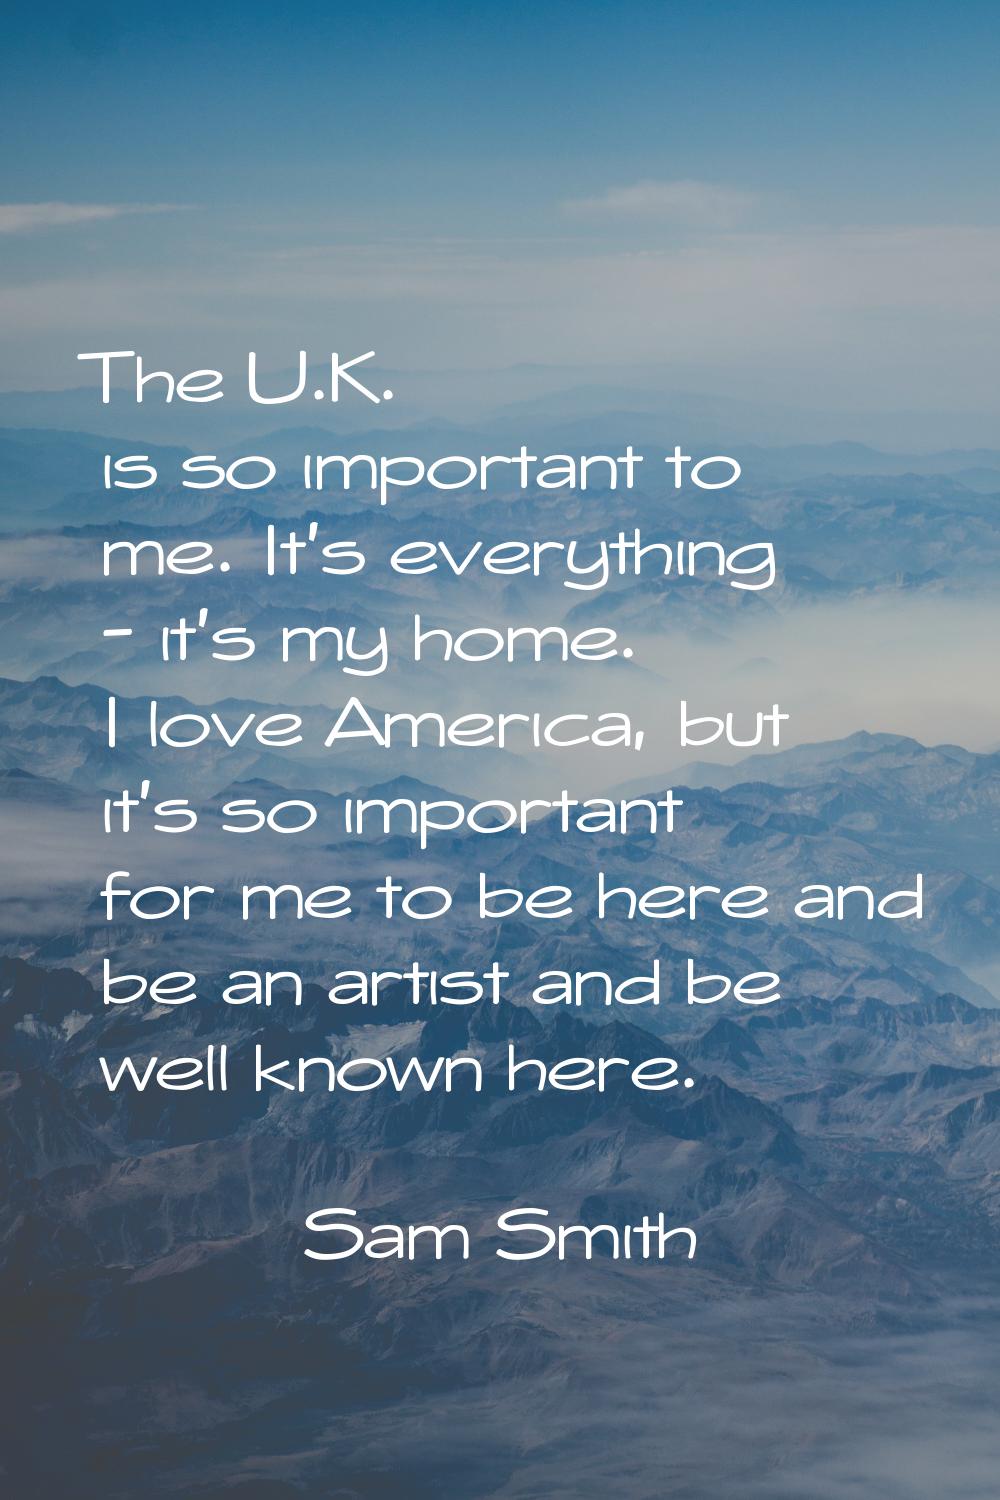 The U.K. is so important to me. It's everything - it's my home. I love America, but it's so importa